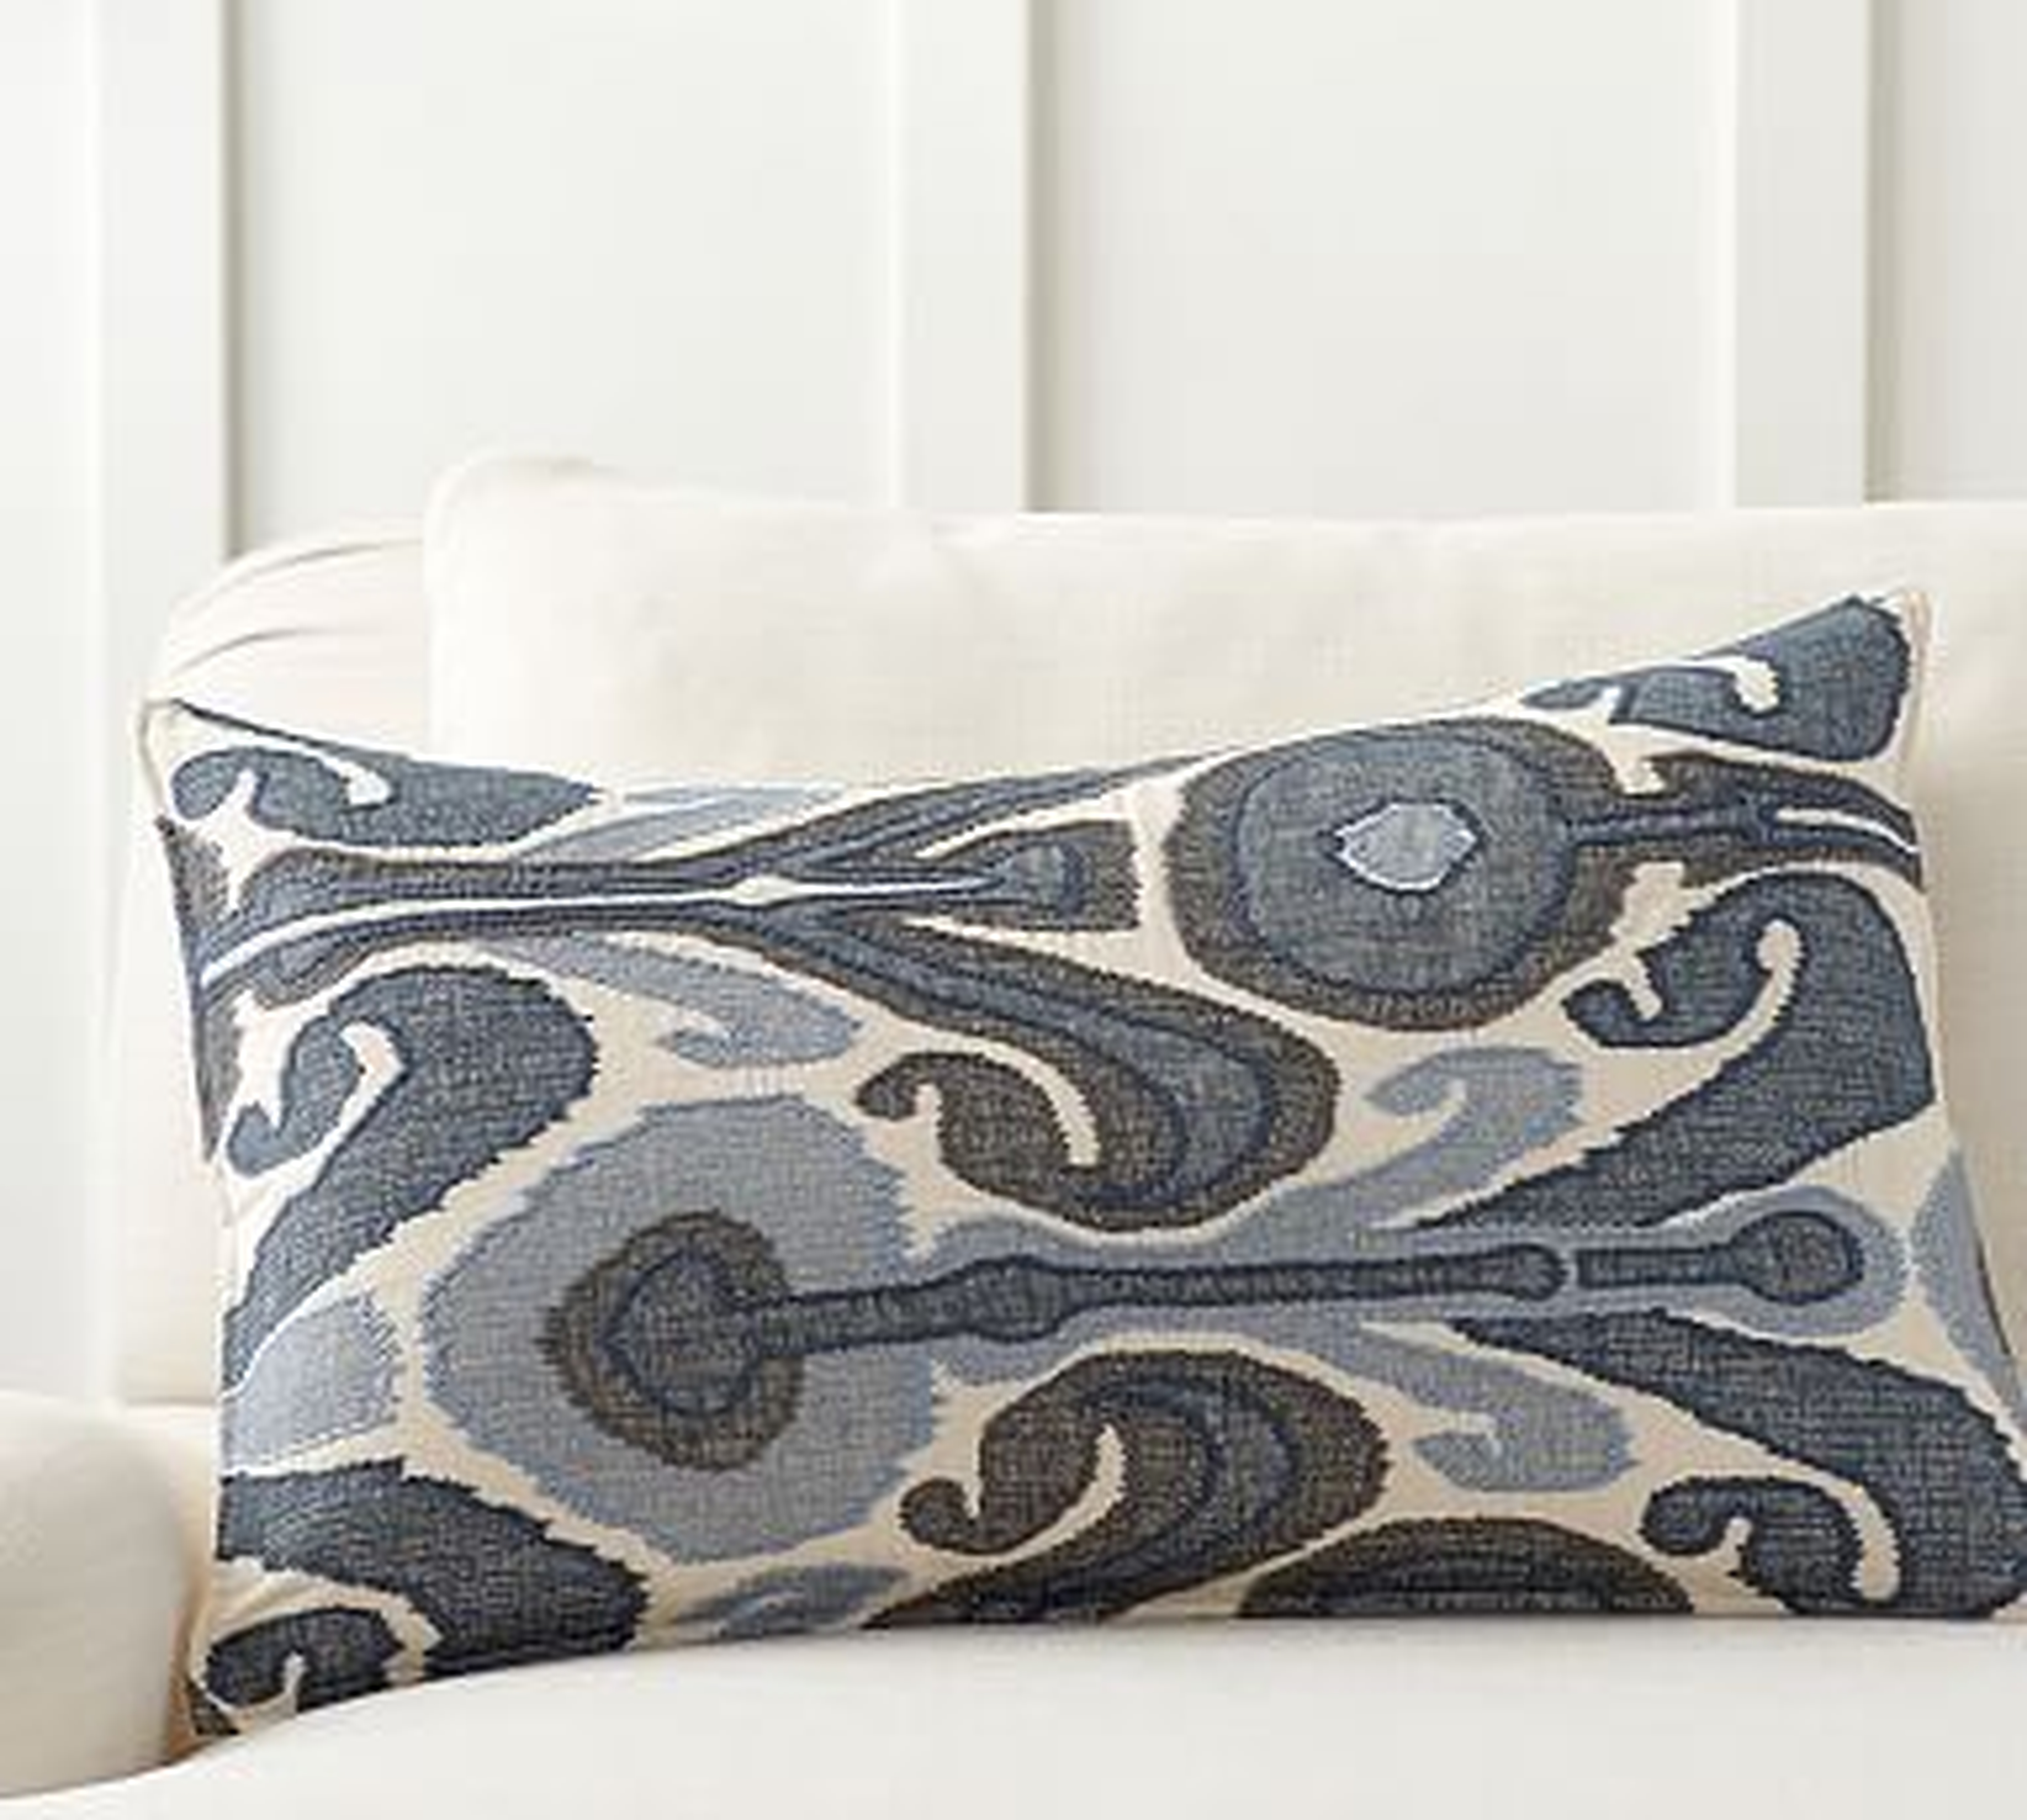 Kenmare Ikat Embroidered Lumbar Pillow Cover, 16 x 26", Blue Multi - Pottery Barn